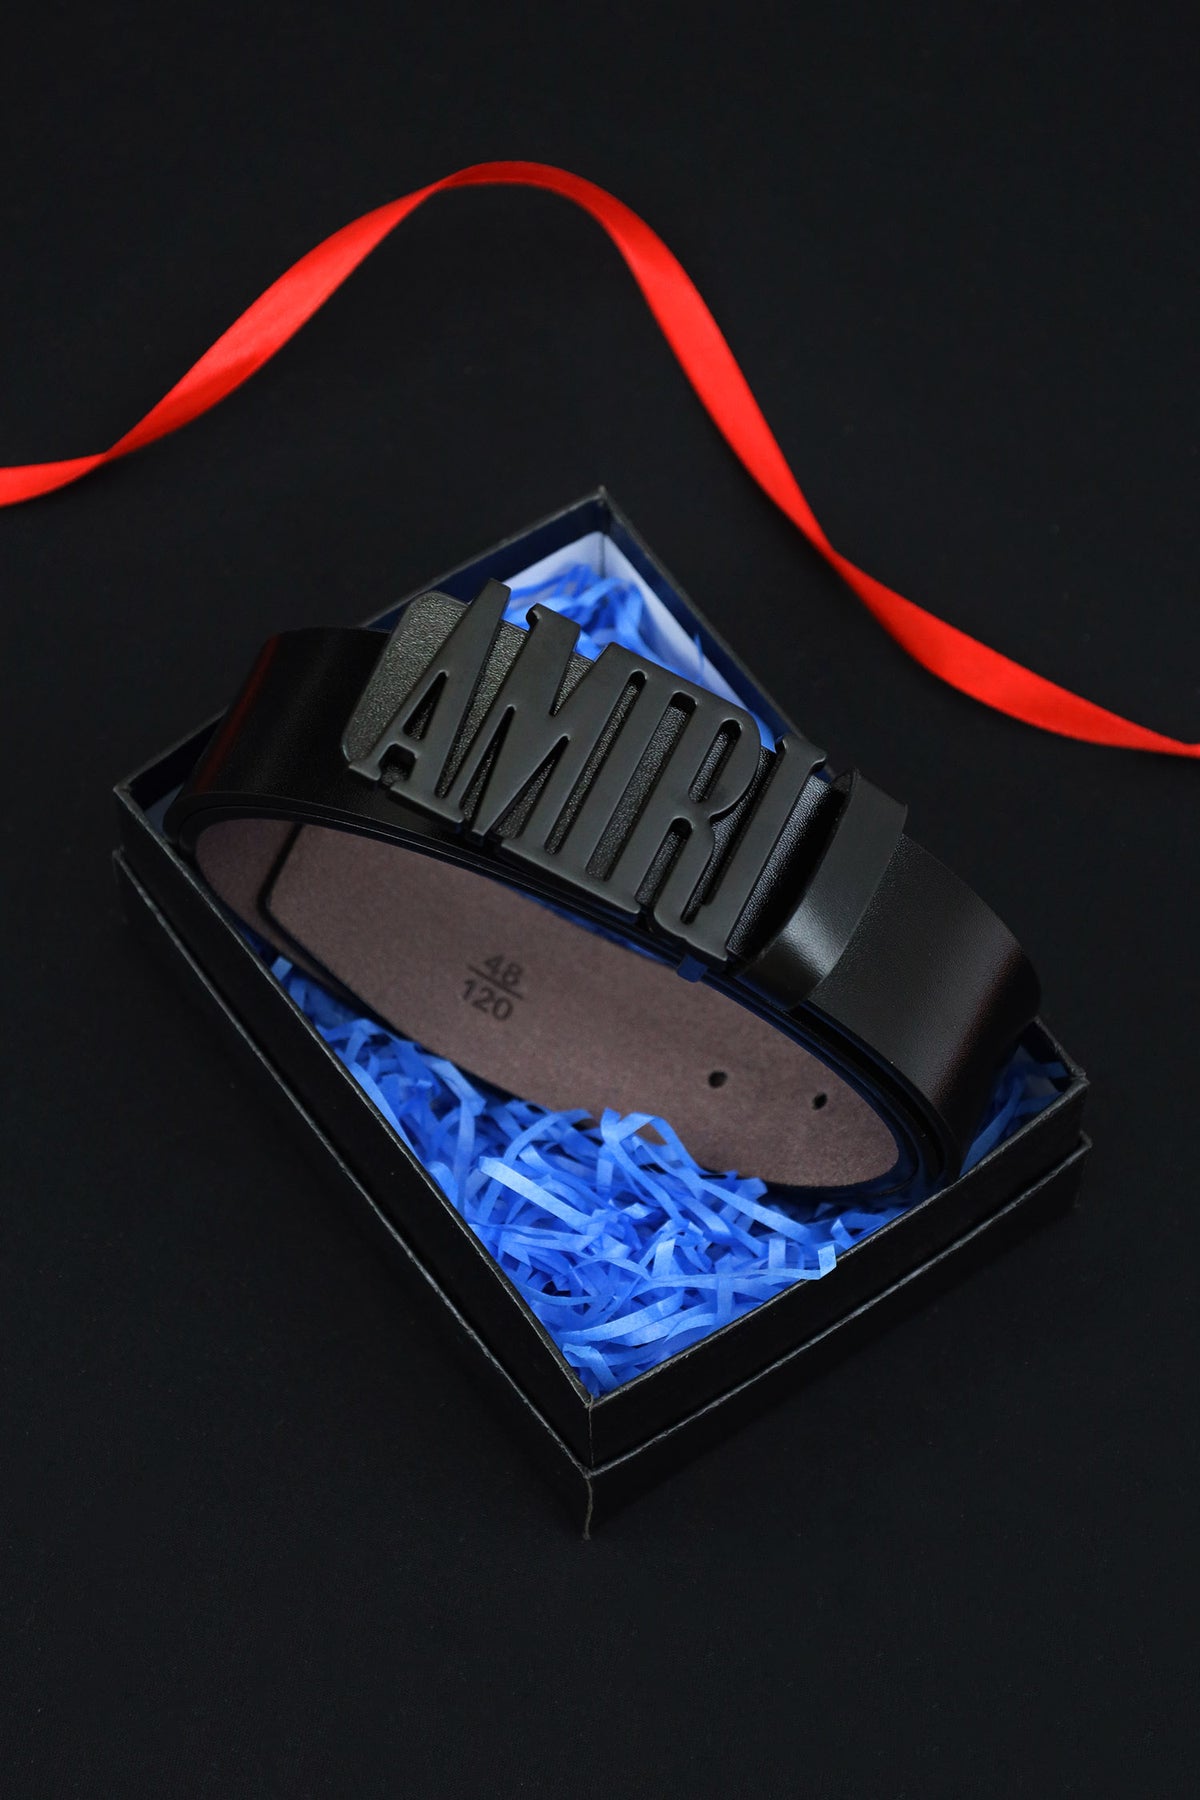 Amrii Metal Alloy Automatic Buckle Branded Belt